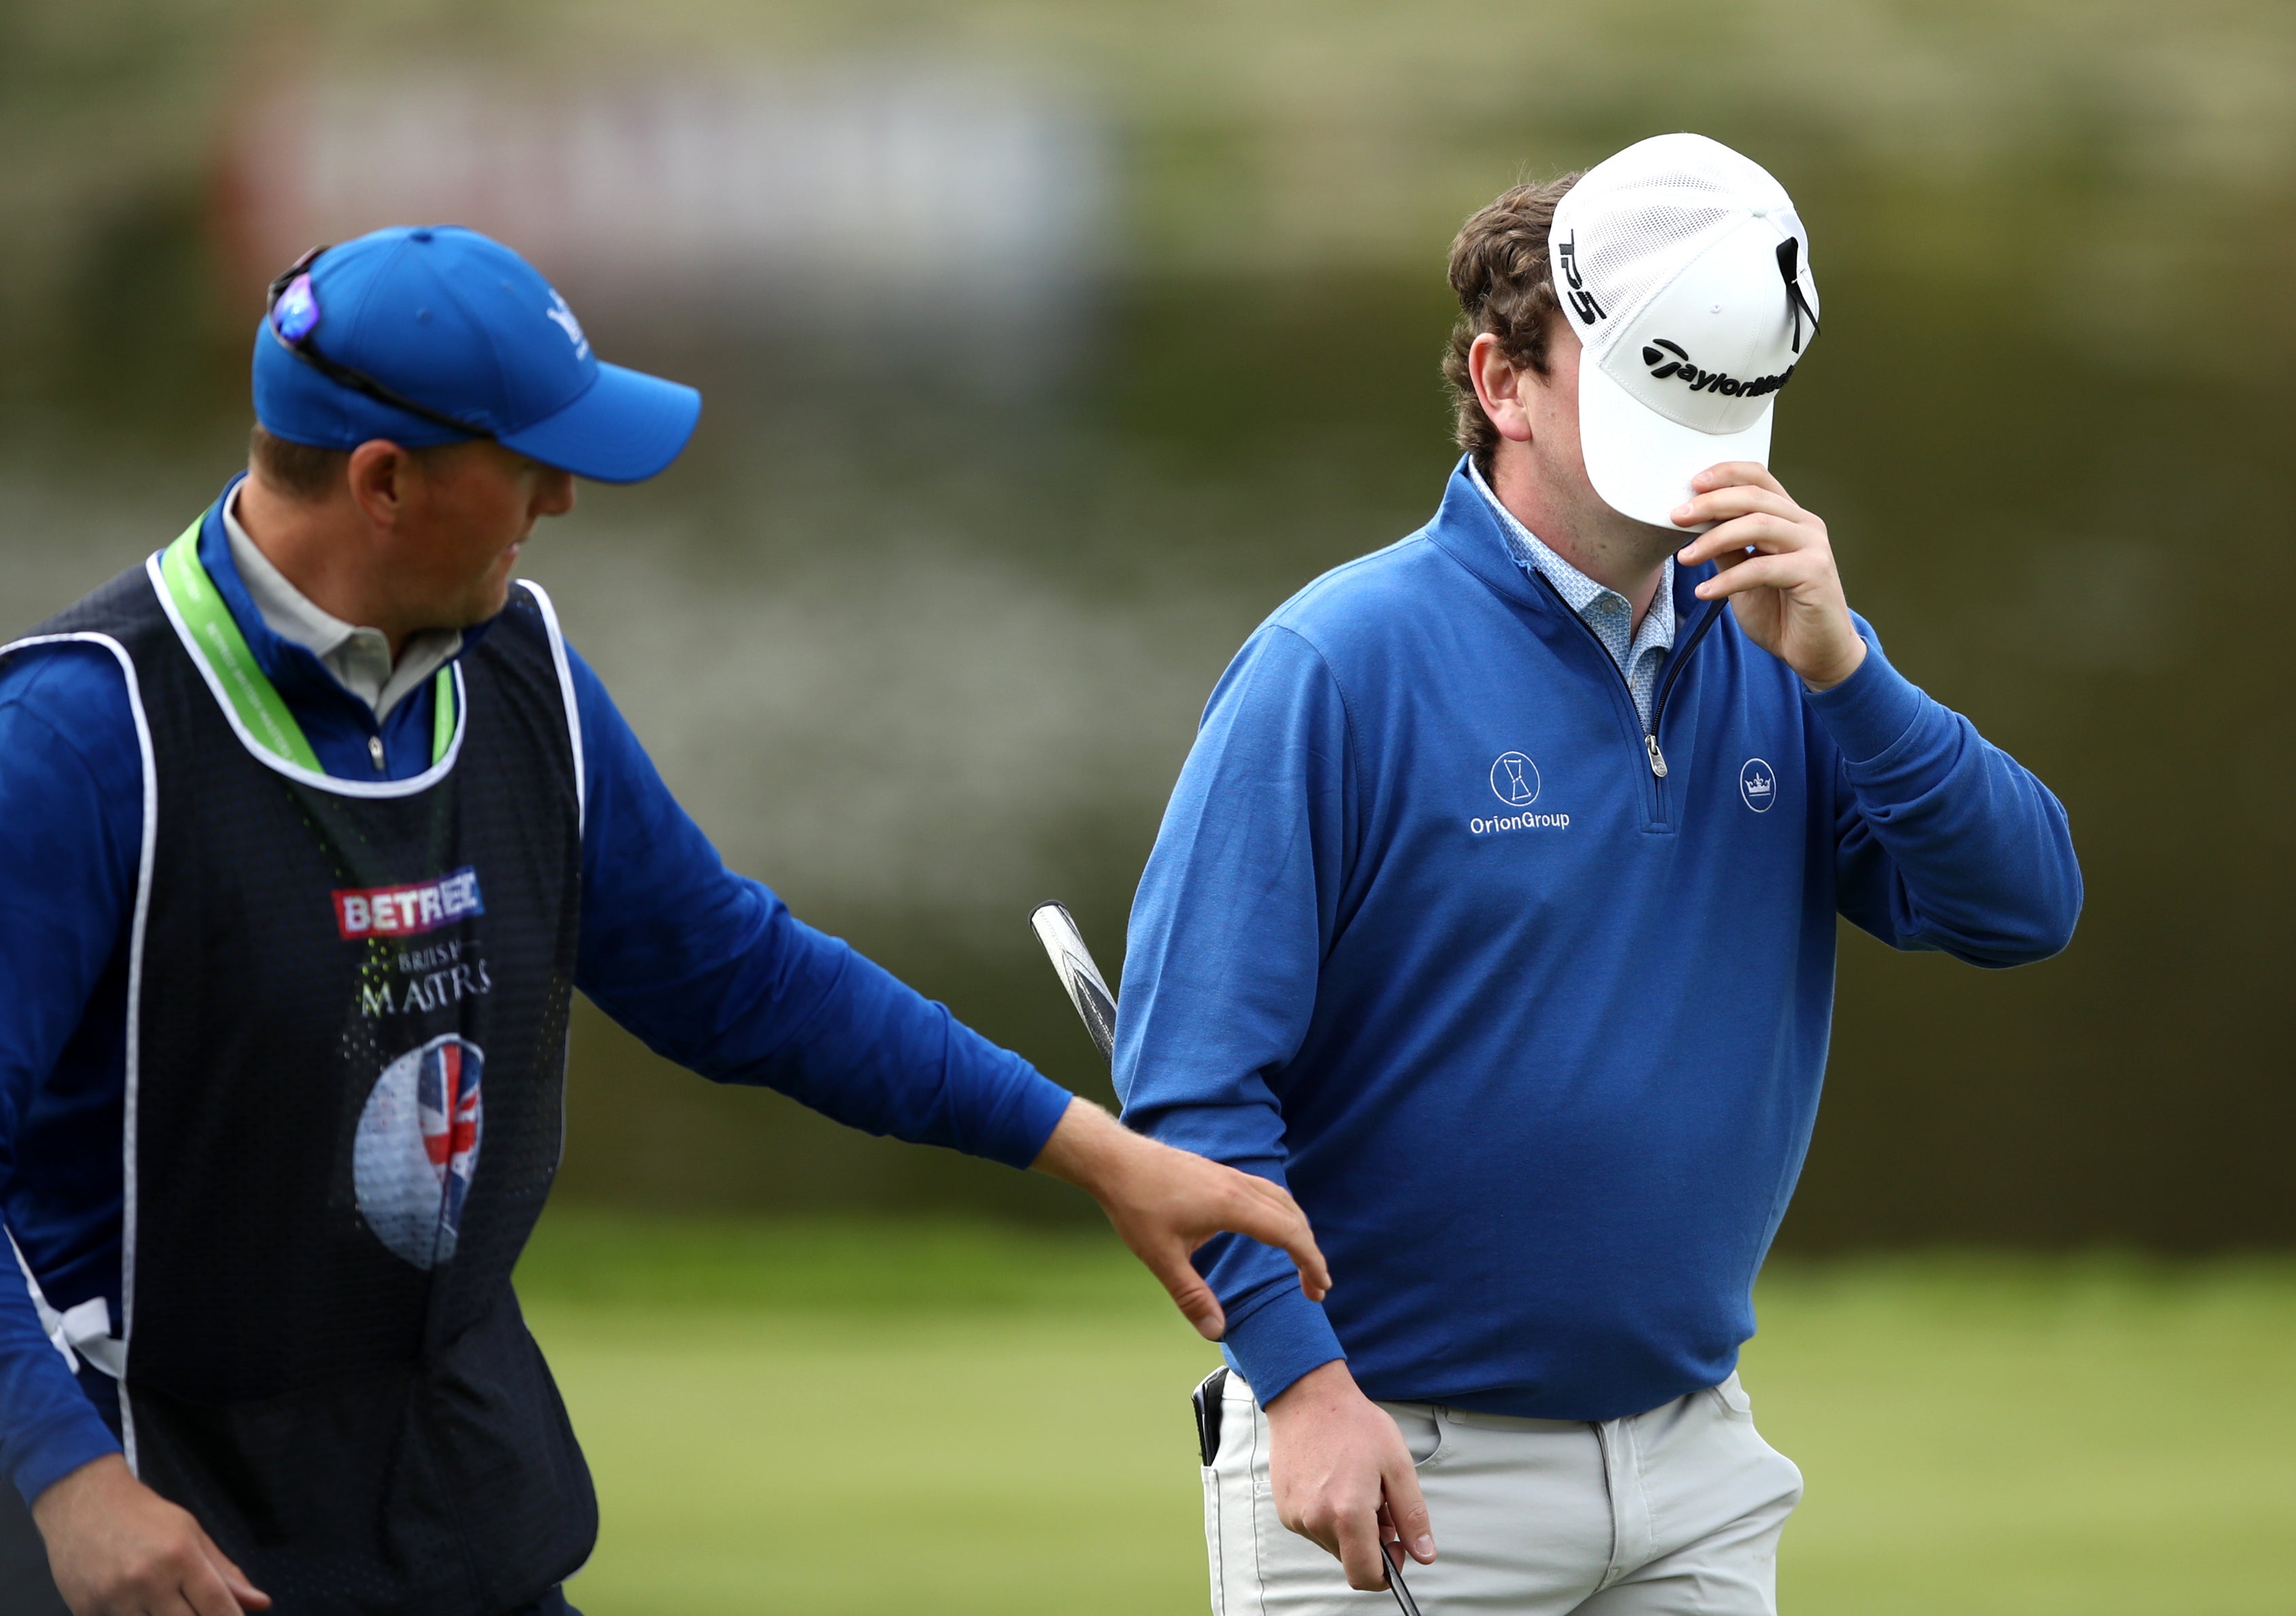 Scotland’s Robert MacIntyre (right) reacts after putting on the 18th green during day three of the Betfred British Masters at The Belfry (Tim Goode/PA)